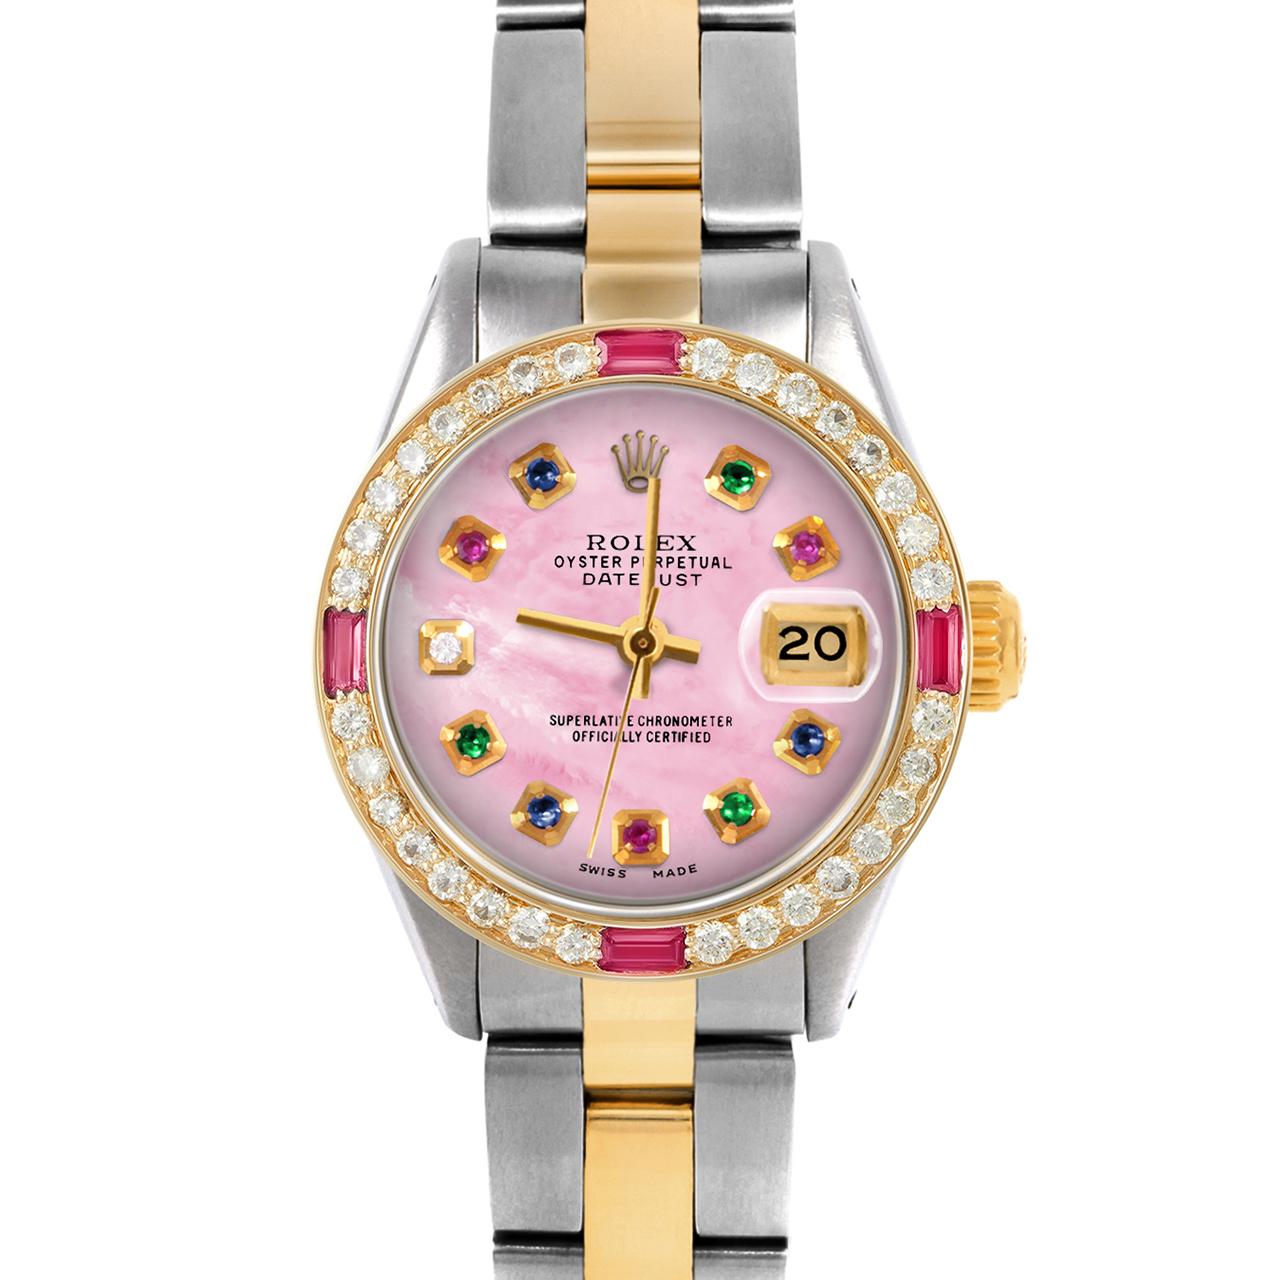 Swiss Wrist - SKU 6917-TT-PMOP-DIA-AM-BDS-OYS

Brand : Rolex
Model : Datejust (Non-Quickset Model)
Gender : Ladies
Metals : 14K/Stainless Steel
Case Size : 26 mm

Dial : Custom Pink Mother Of Pearl Rainbow Emerald Ruby Sapphire Diamond Dial (This